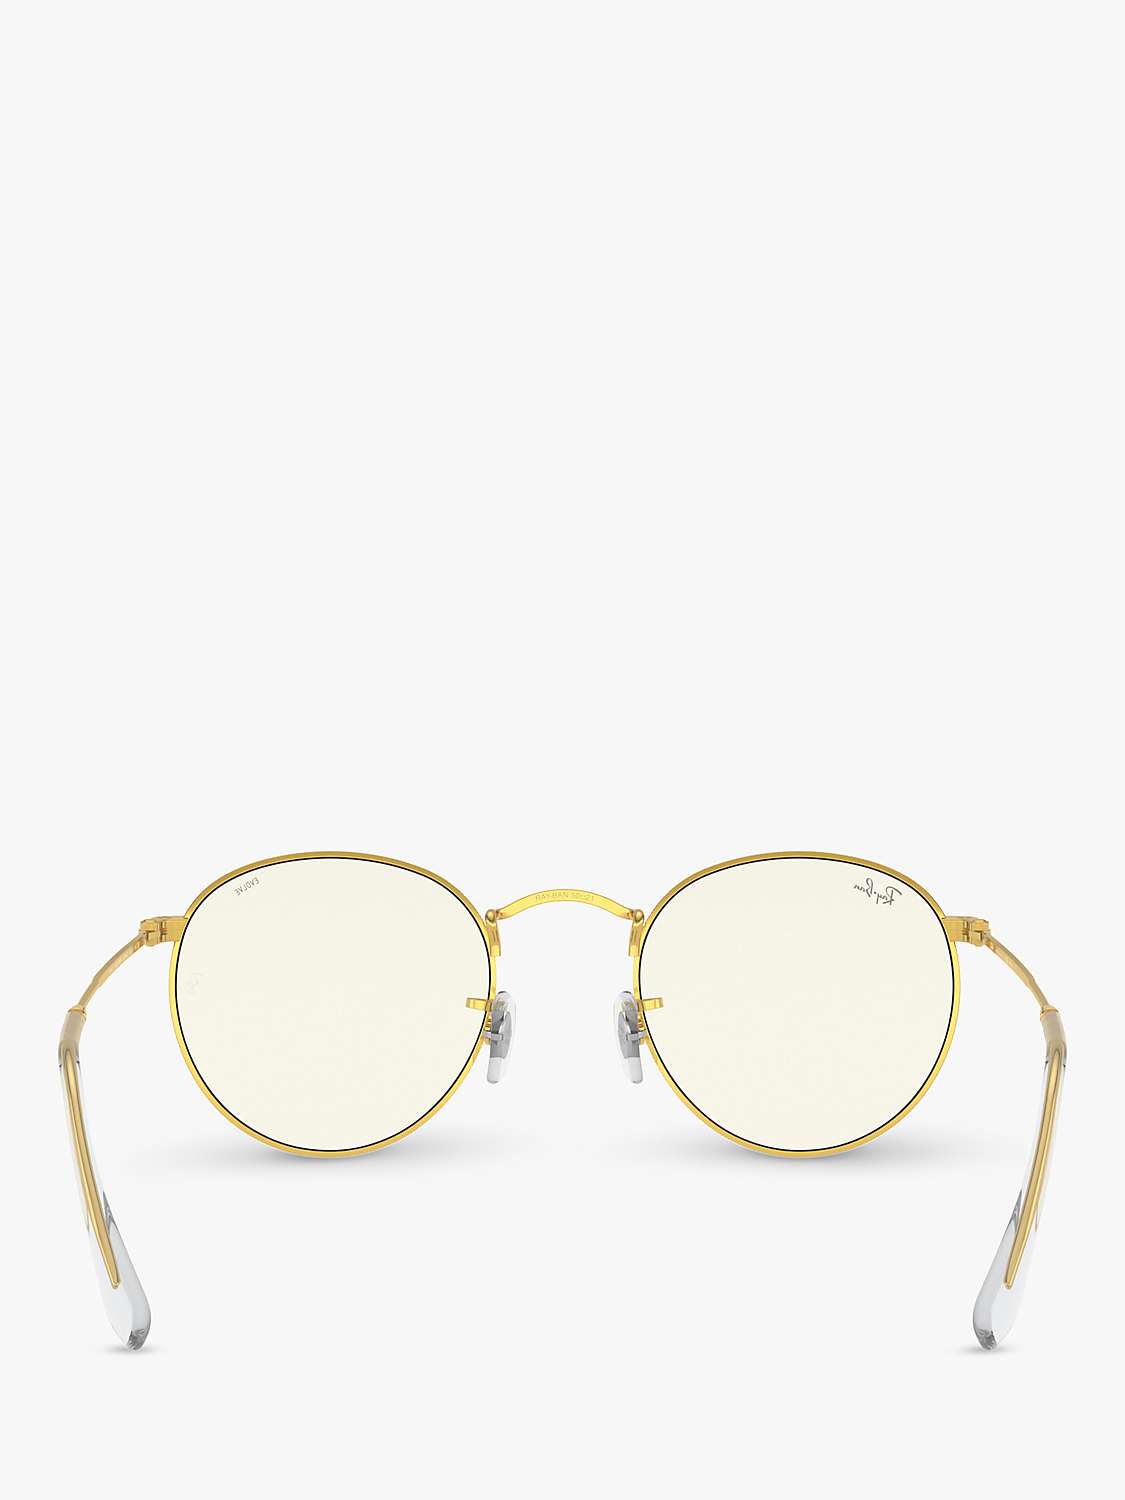 Buy Ray-Ban RB3447 Women's Round Metal Sunglasses, Gold Online at johnlewis.com